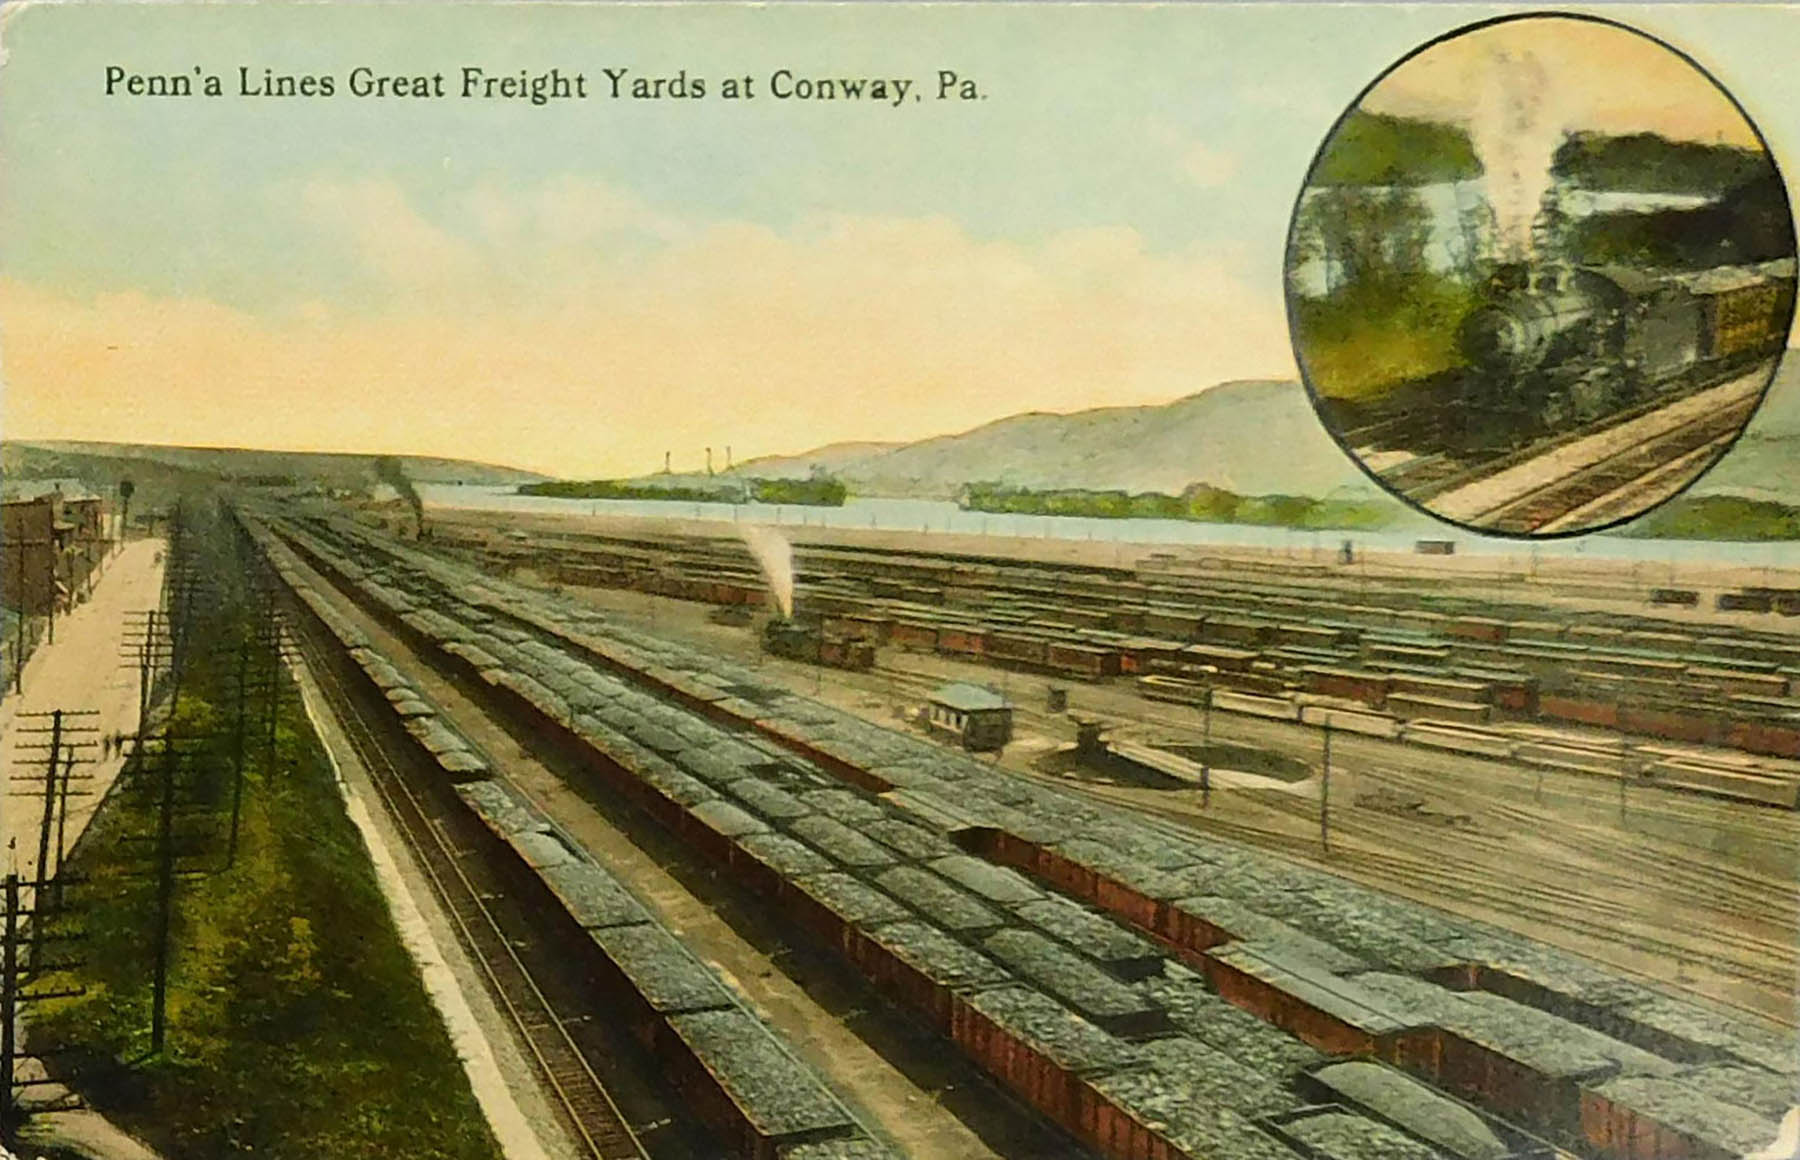 Penn'a Lines Great Freight Yards At Conway, PA. colored photo of many loaded hopper cars. Circular inset of steam locomotive. Turntable in center; mountains and river in background.